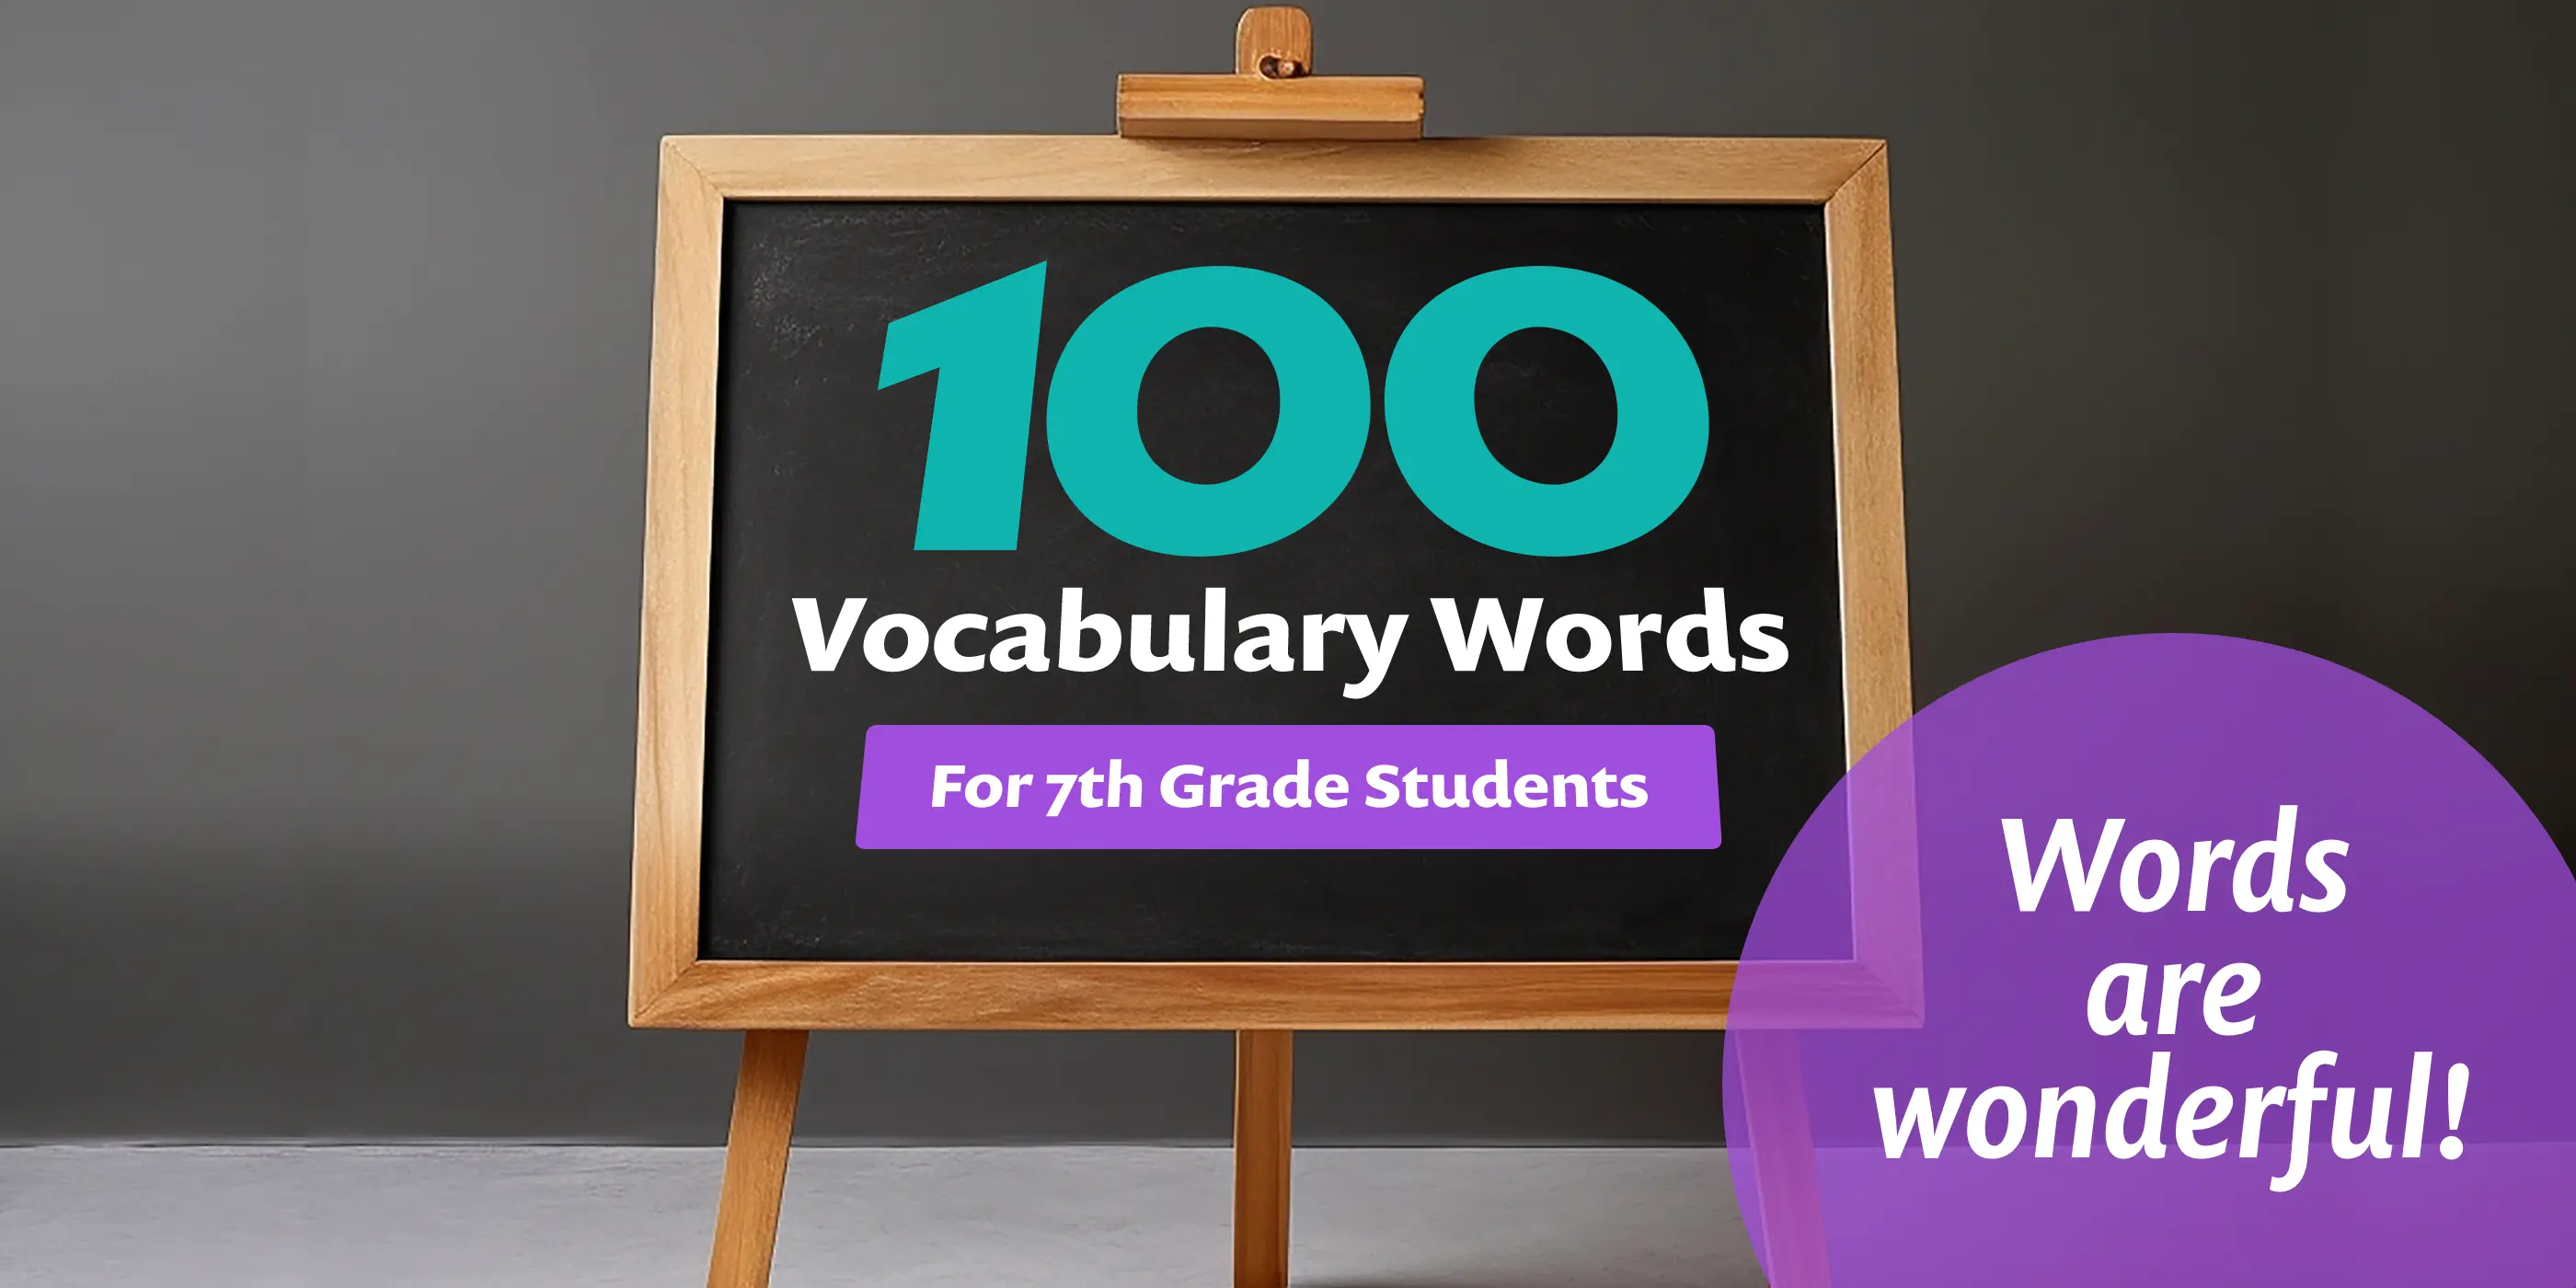 100 Vocabulary Words for 7th Grade Students